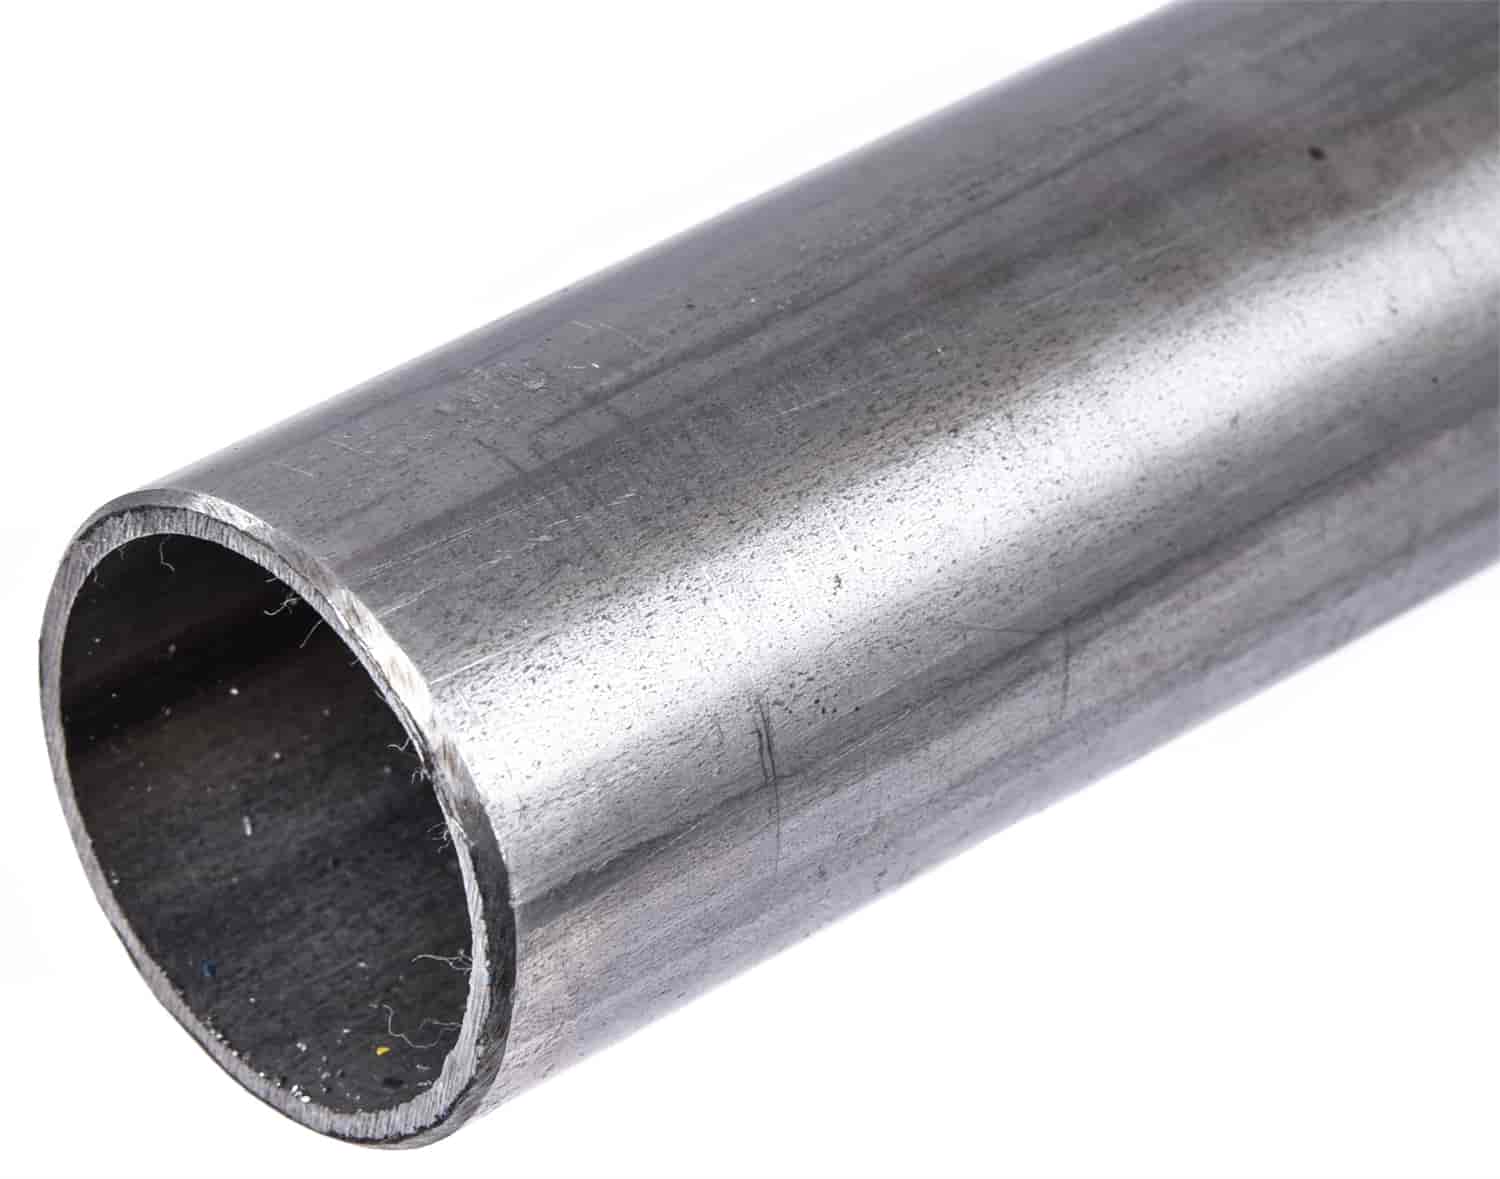 Mild Steel Tubing [Round, 1 1/4 in. Diameter x 0.083 in. Thickness x 8 ft. Length]